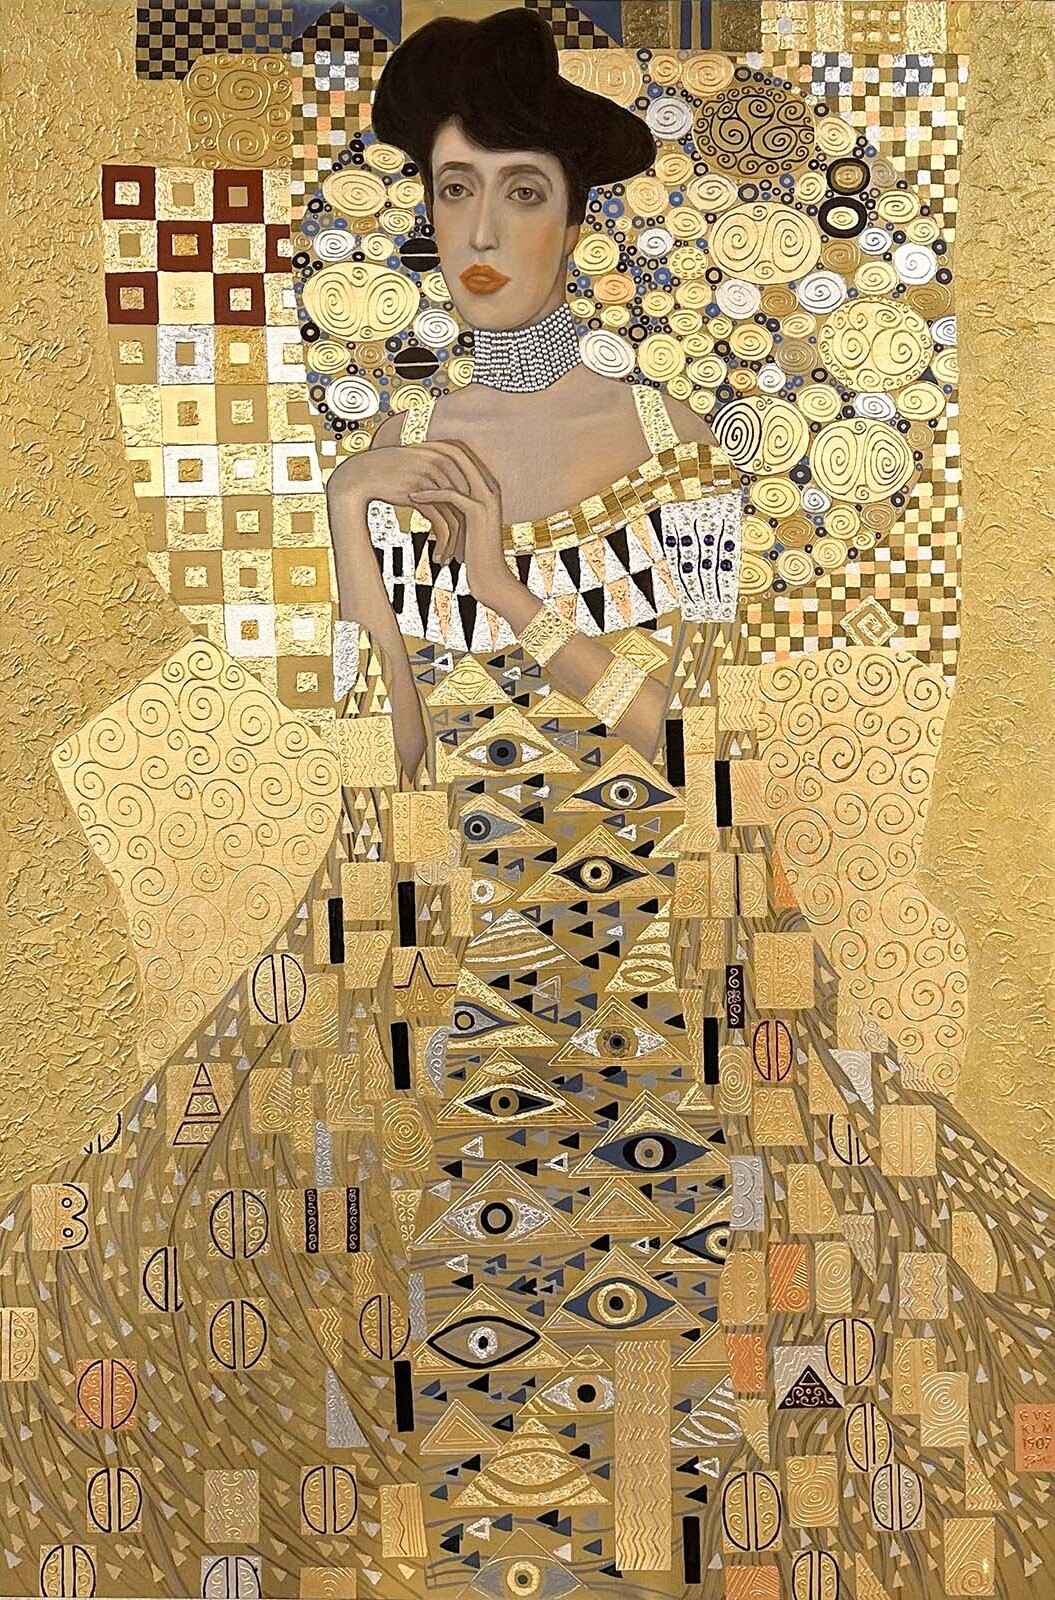 Replica Painting. Title: Golden Adele, Oil on Canvas, Gold, Silver, Swarovski Crystals, 72 x 48 in by artist Mykola Yurov.